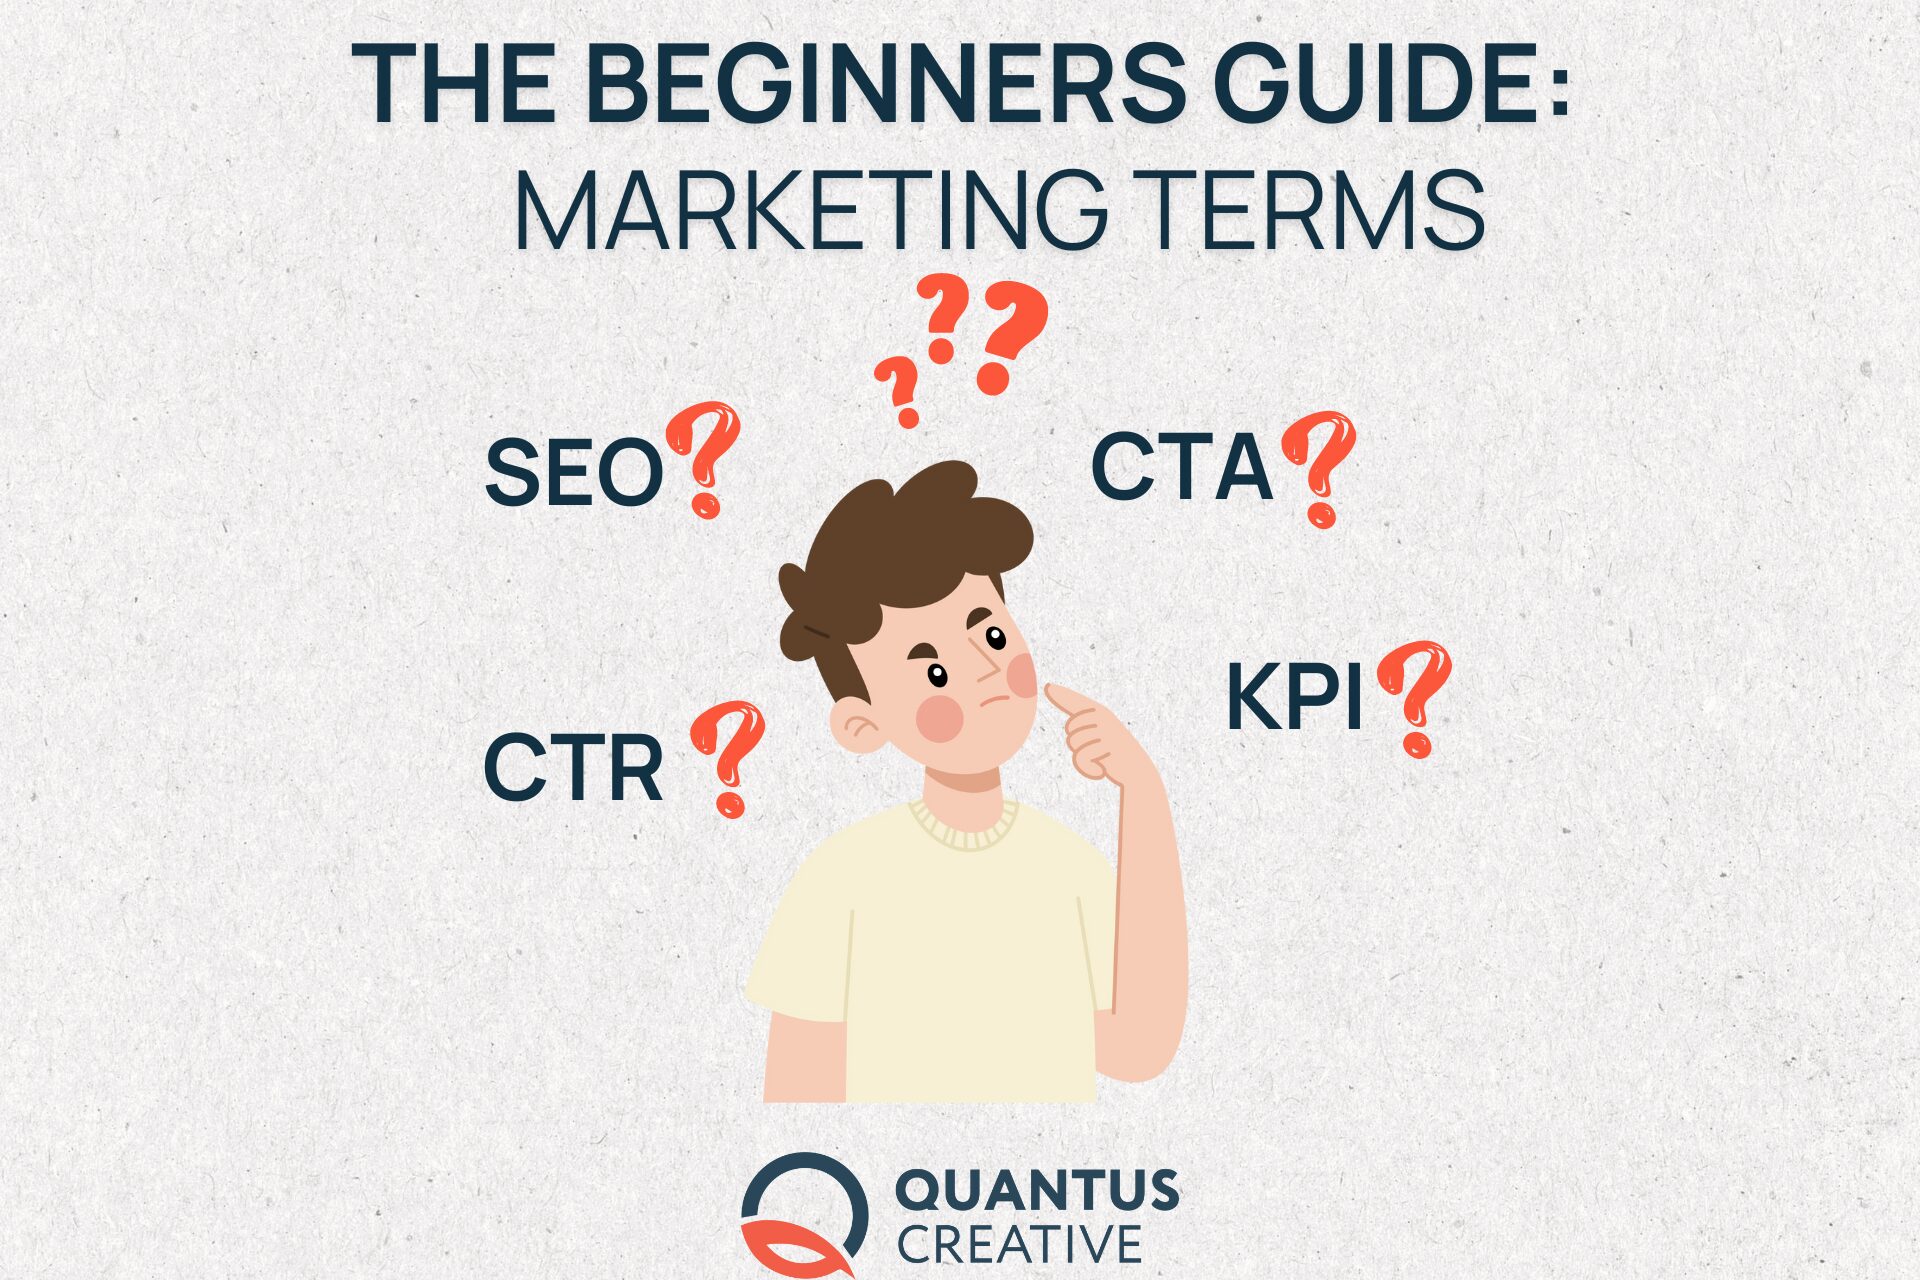 Beginners Guide to Marketing Terms